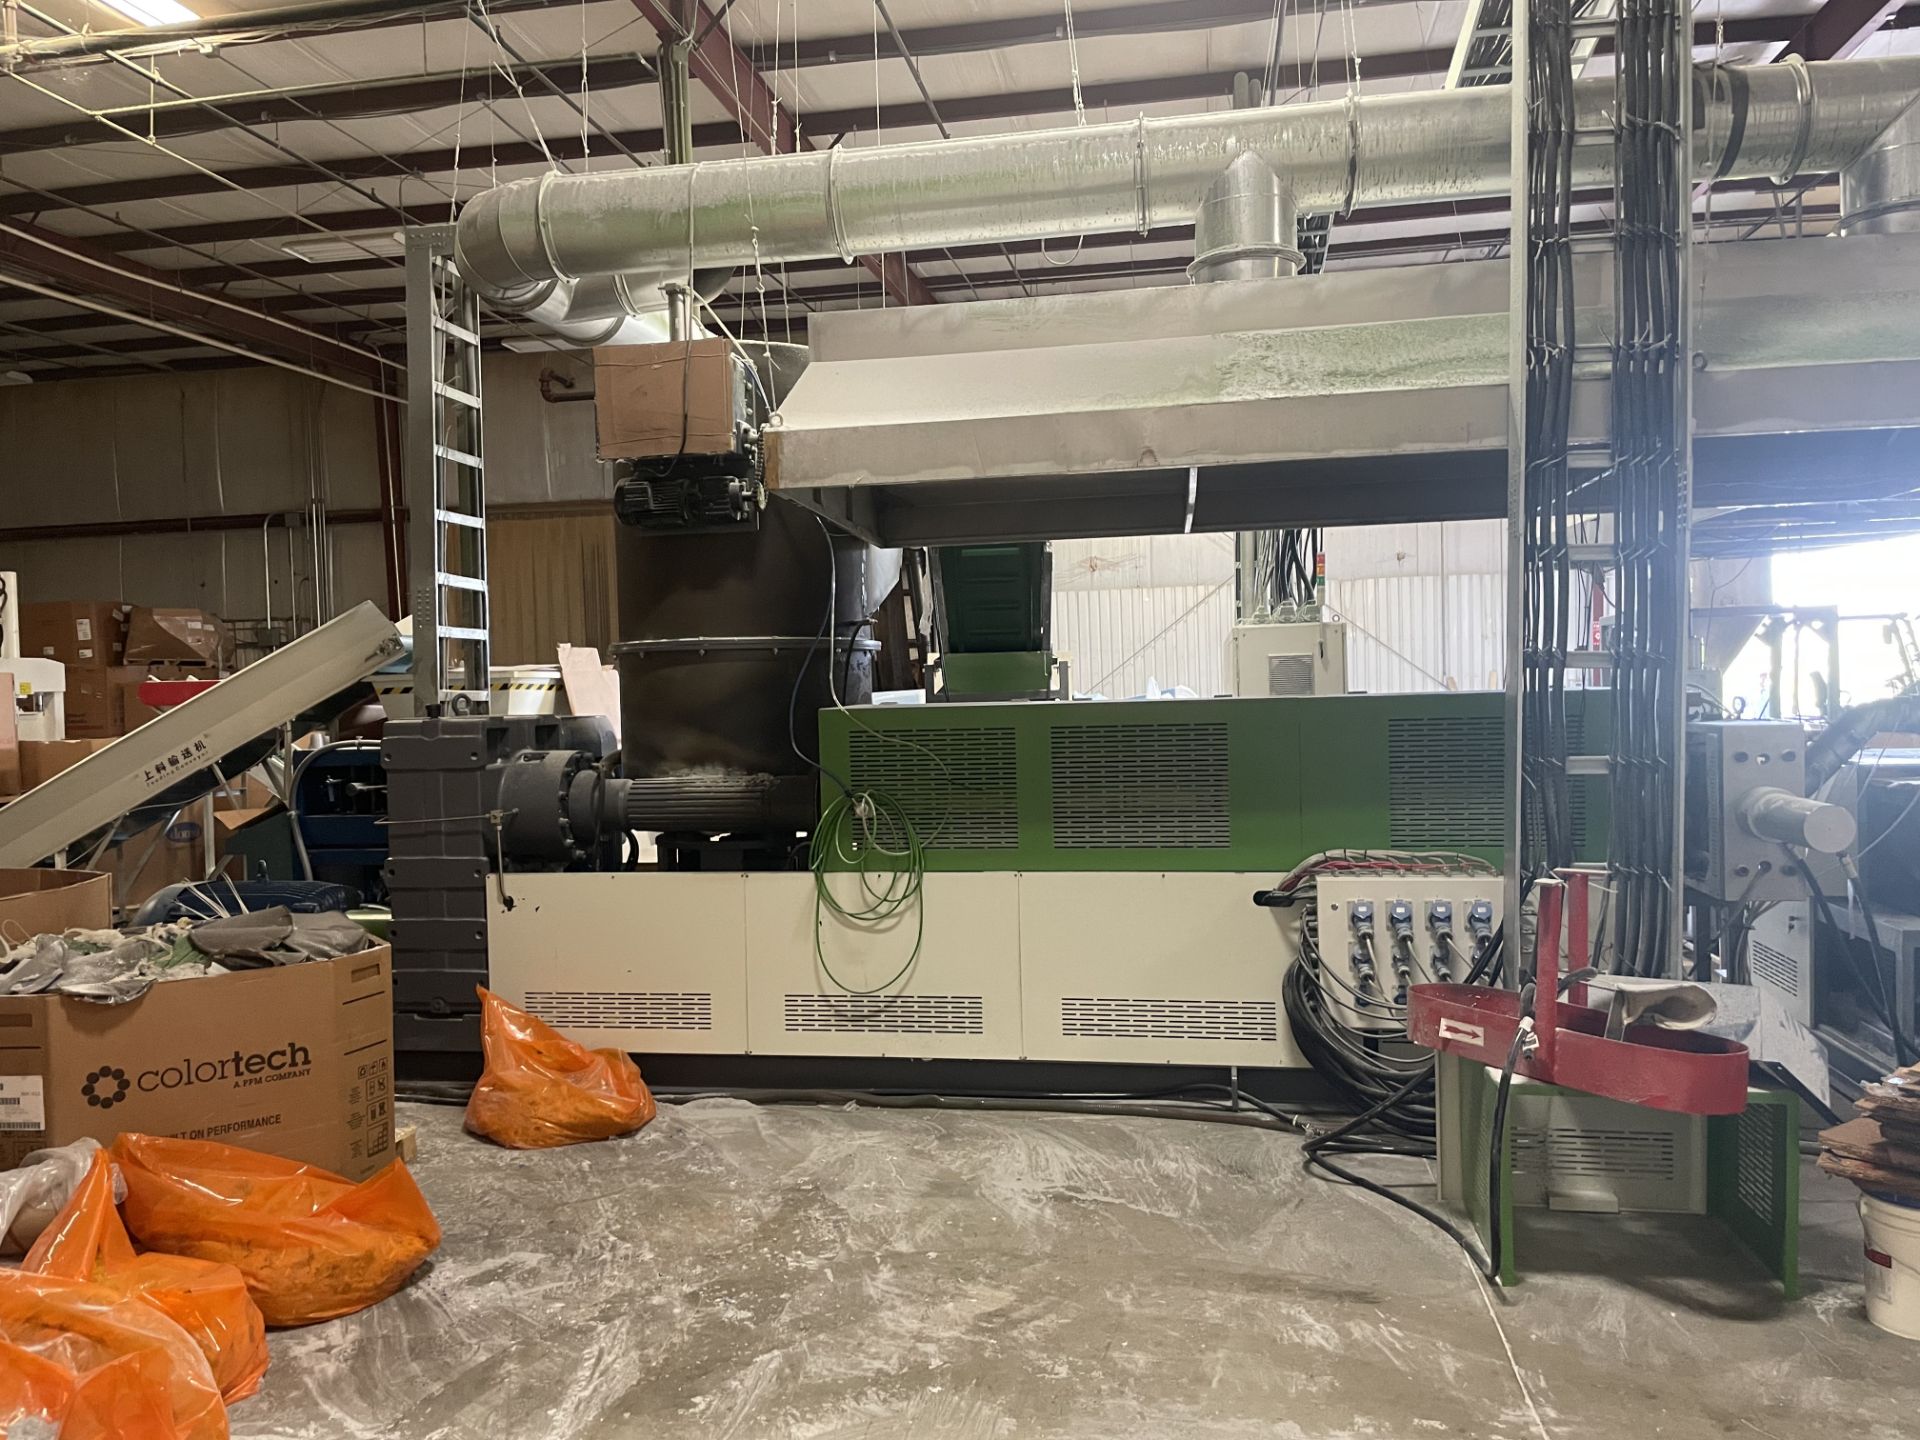 New 2020 Plastic Recycling Pelletizing Line FOR SALE IN OHIO - Image 3 of 8